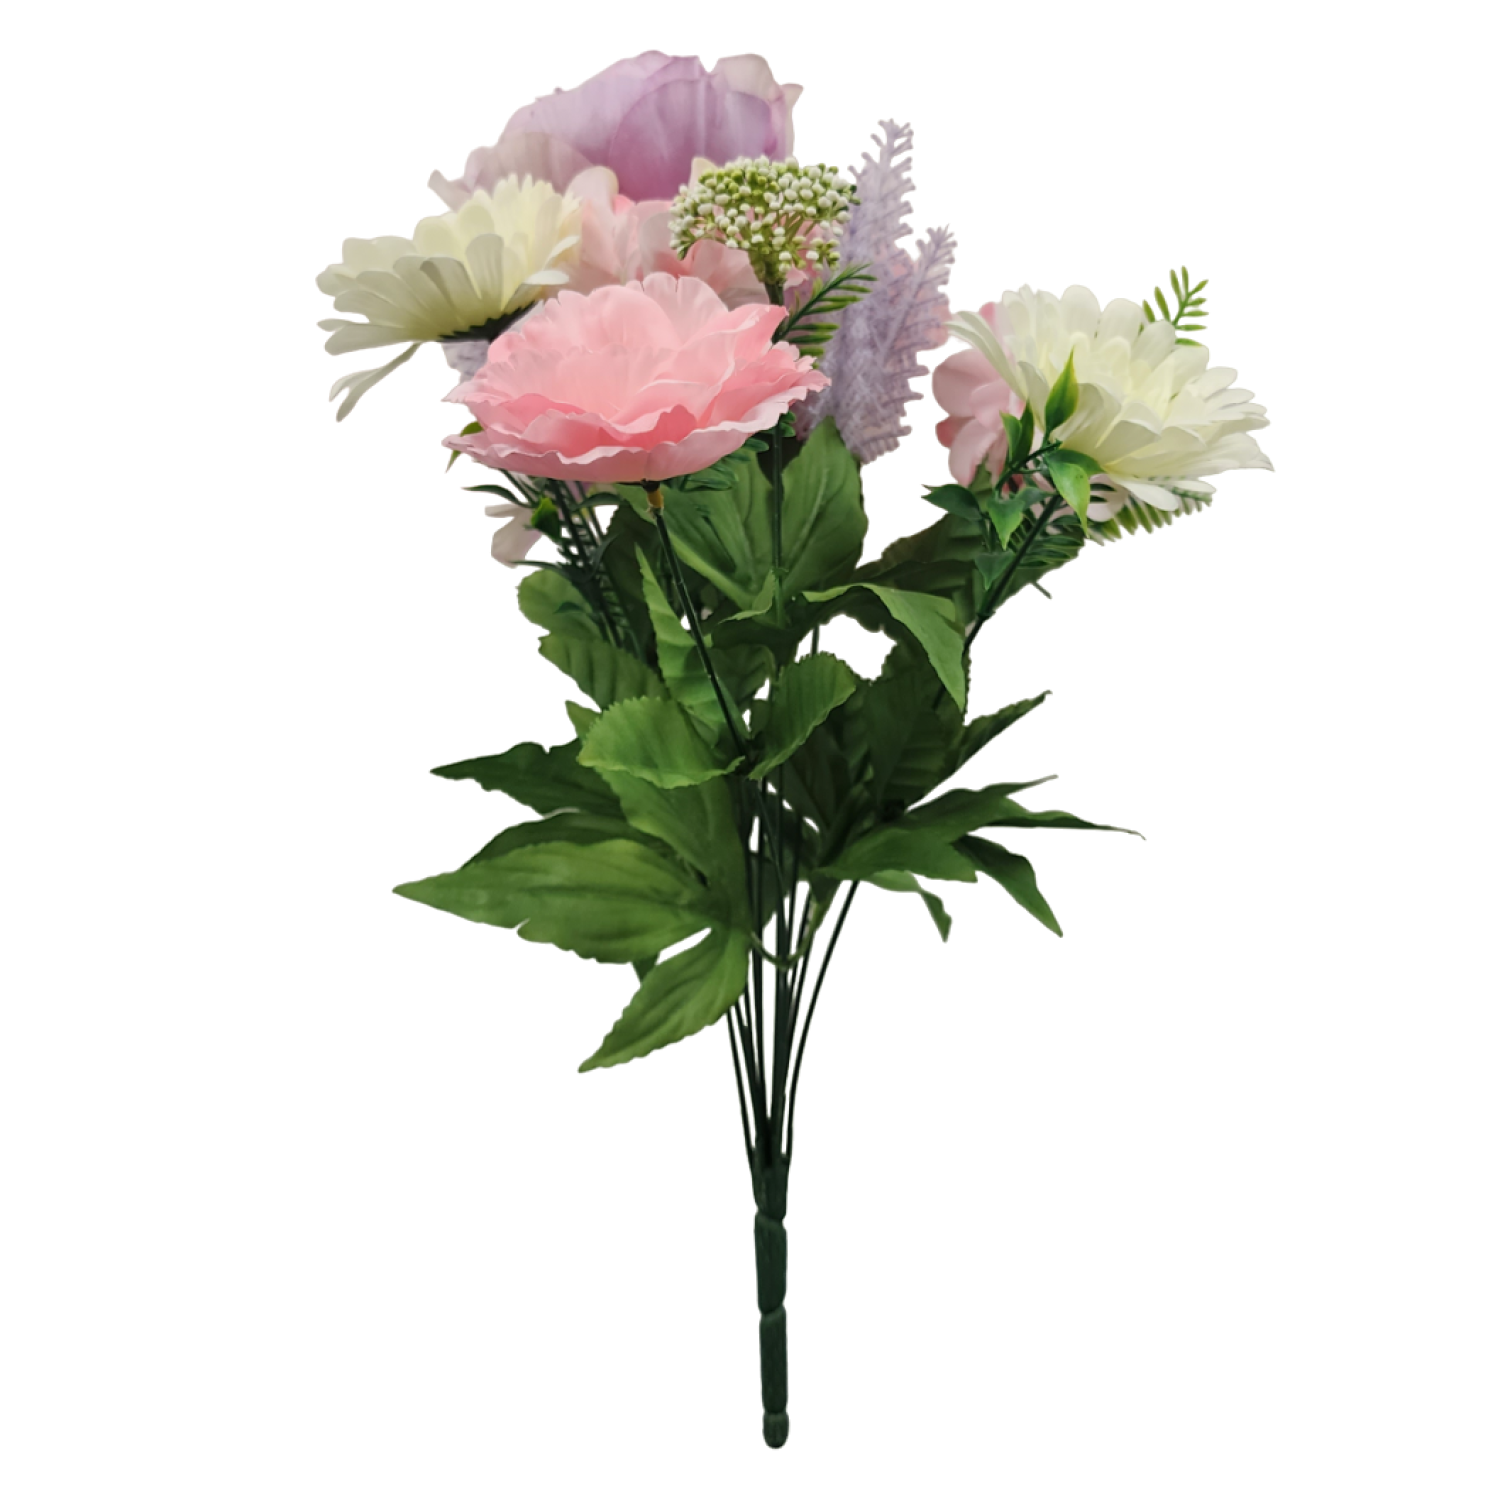 Mainstays Artificial Pink Mixed Peony & Hydrangea 17 in Tall Spring Indoor Bouquet - image 1 of 8